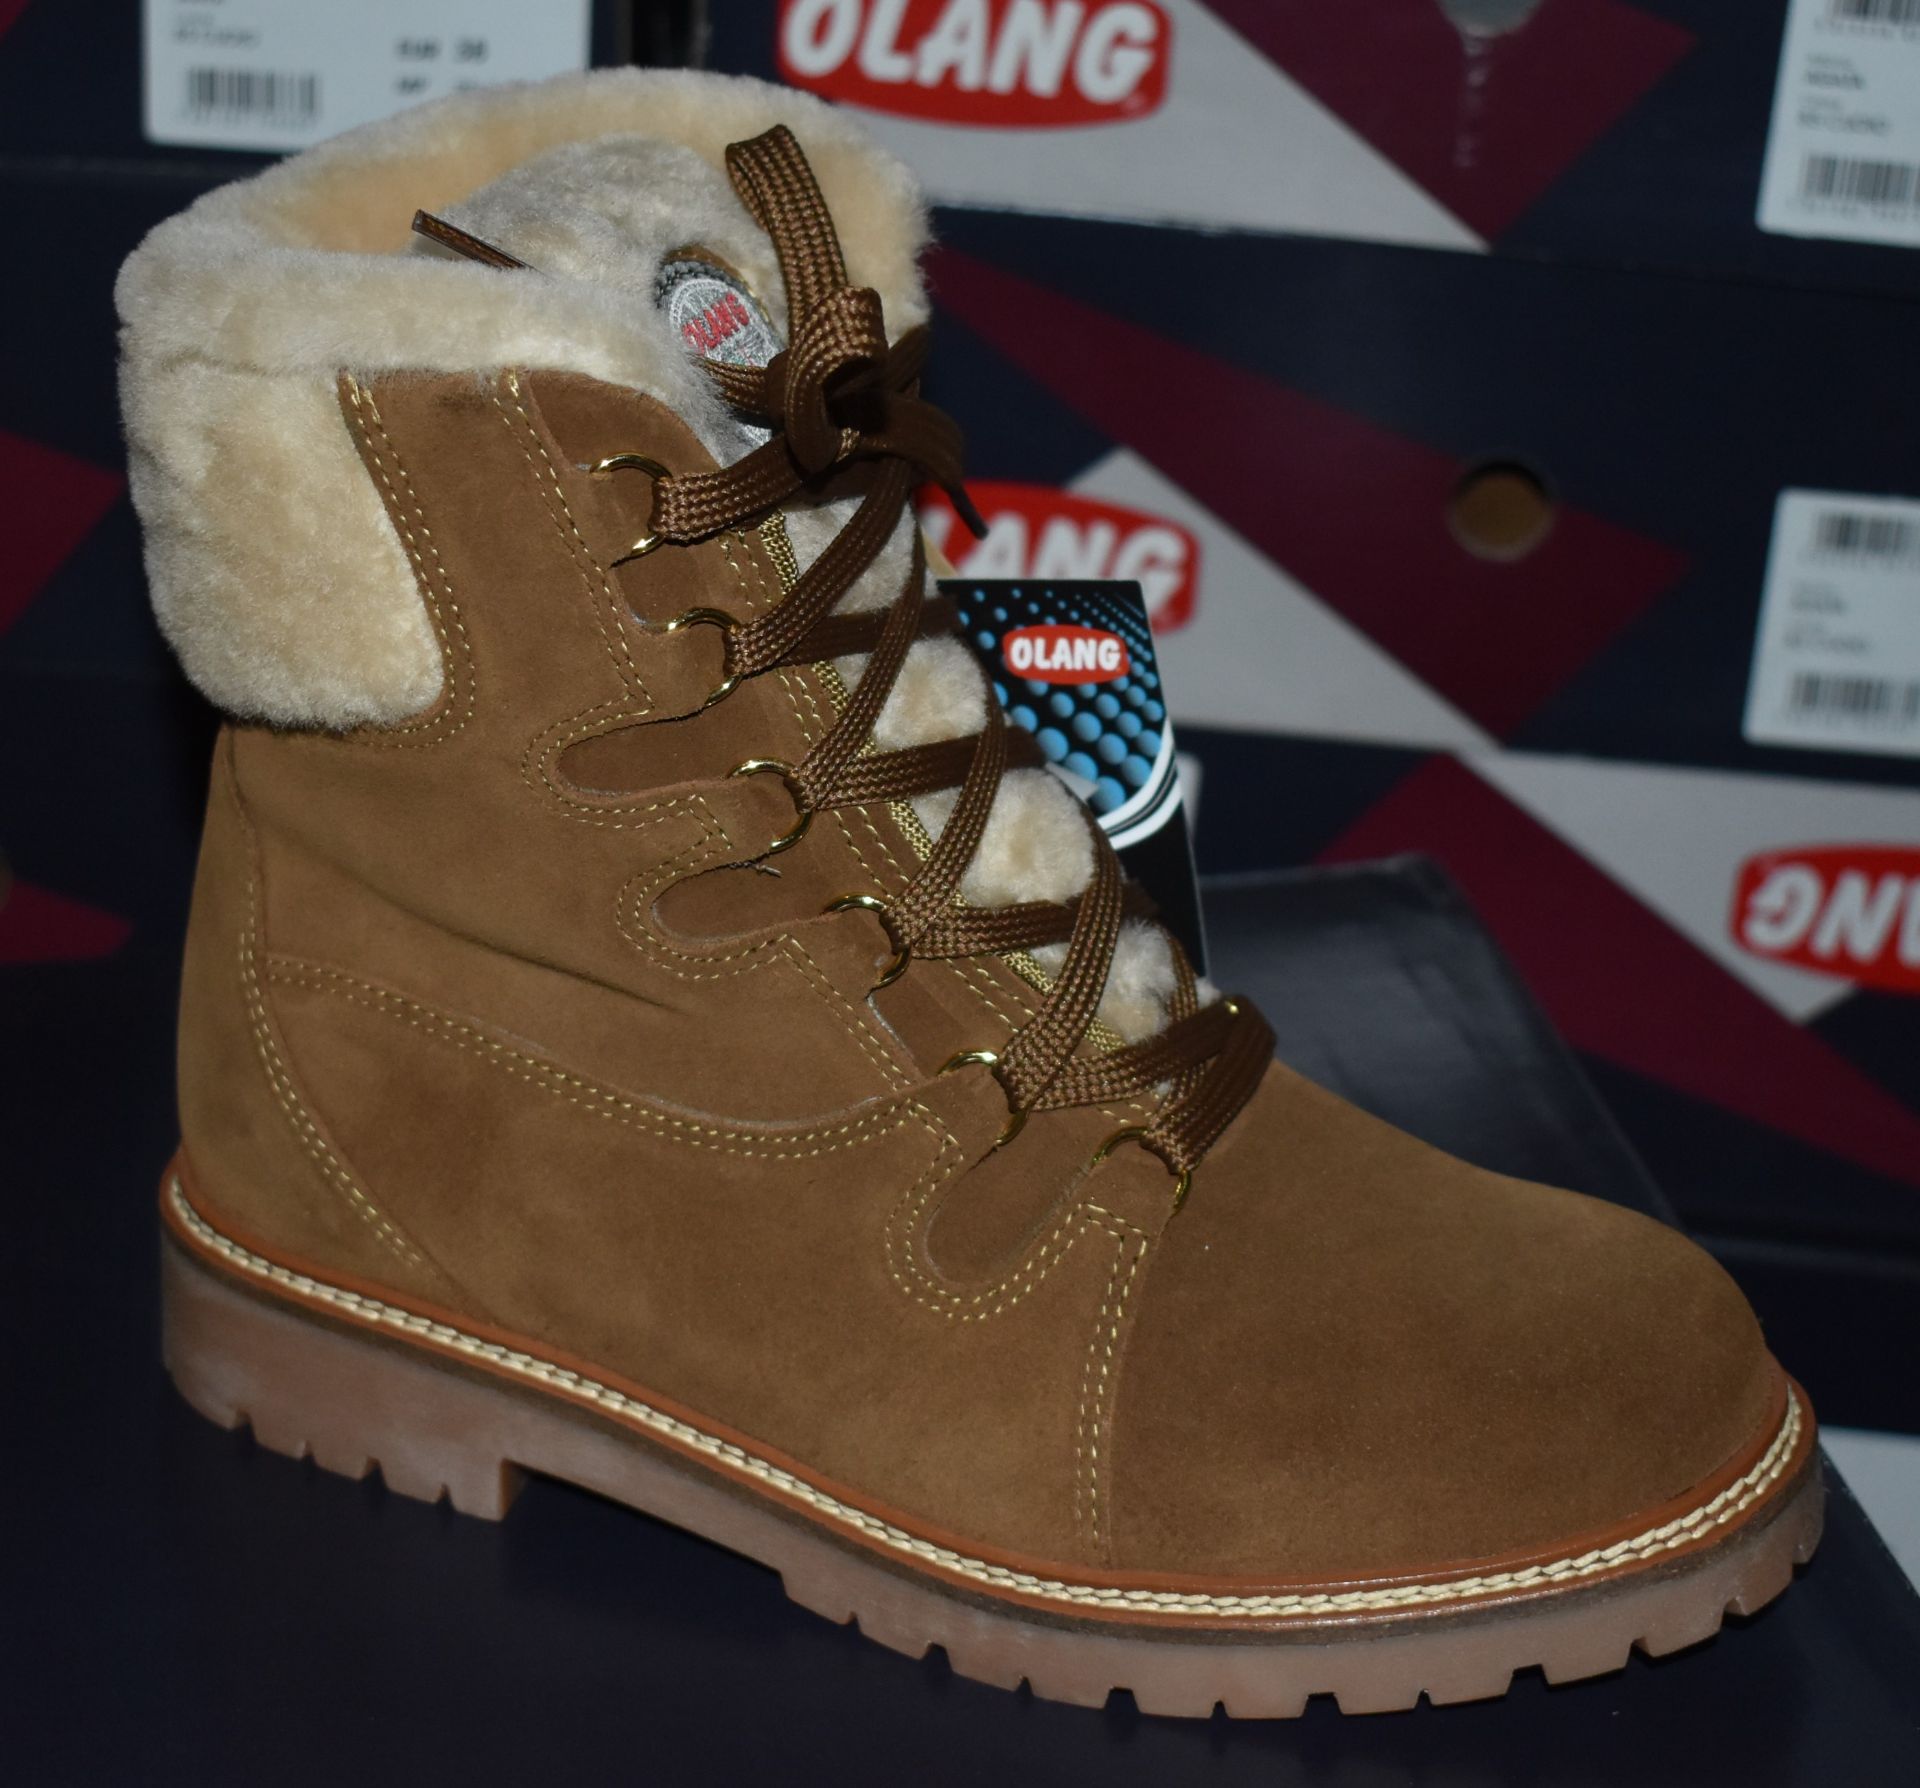 1 x Pair of Designer Olang Meribel 85 CUOIO Women's Winter Boots - Euro Size 41 - Brand New Boxed - Image 4 of 8